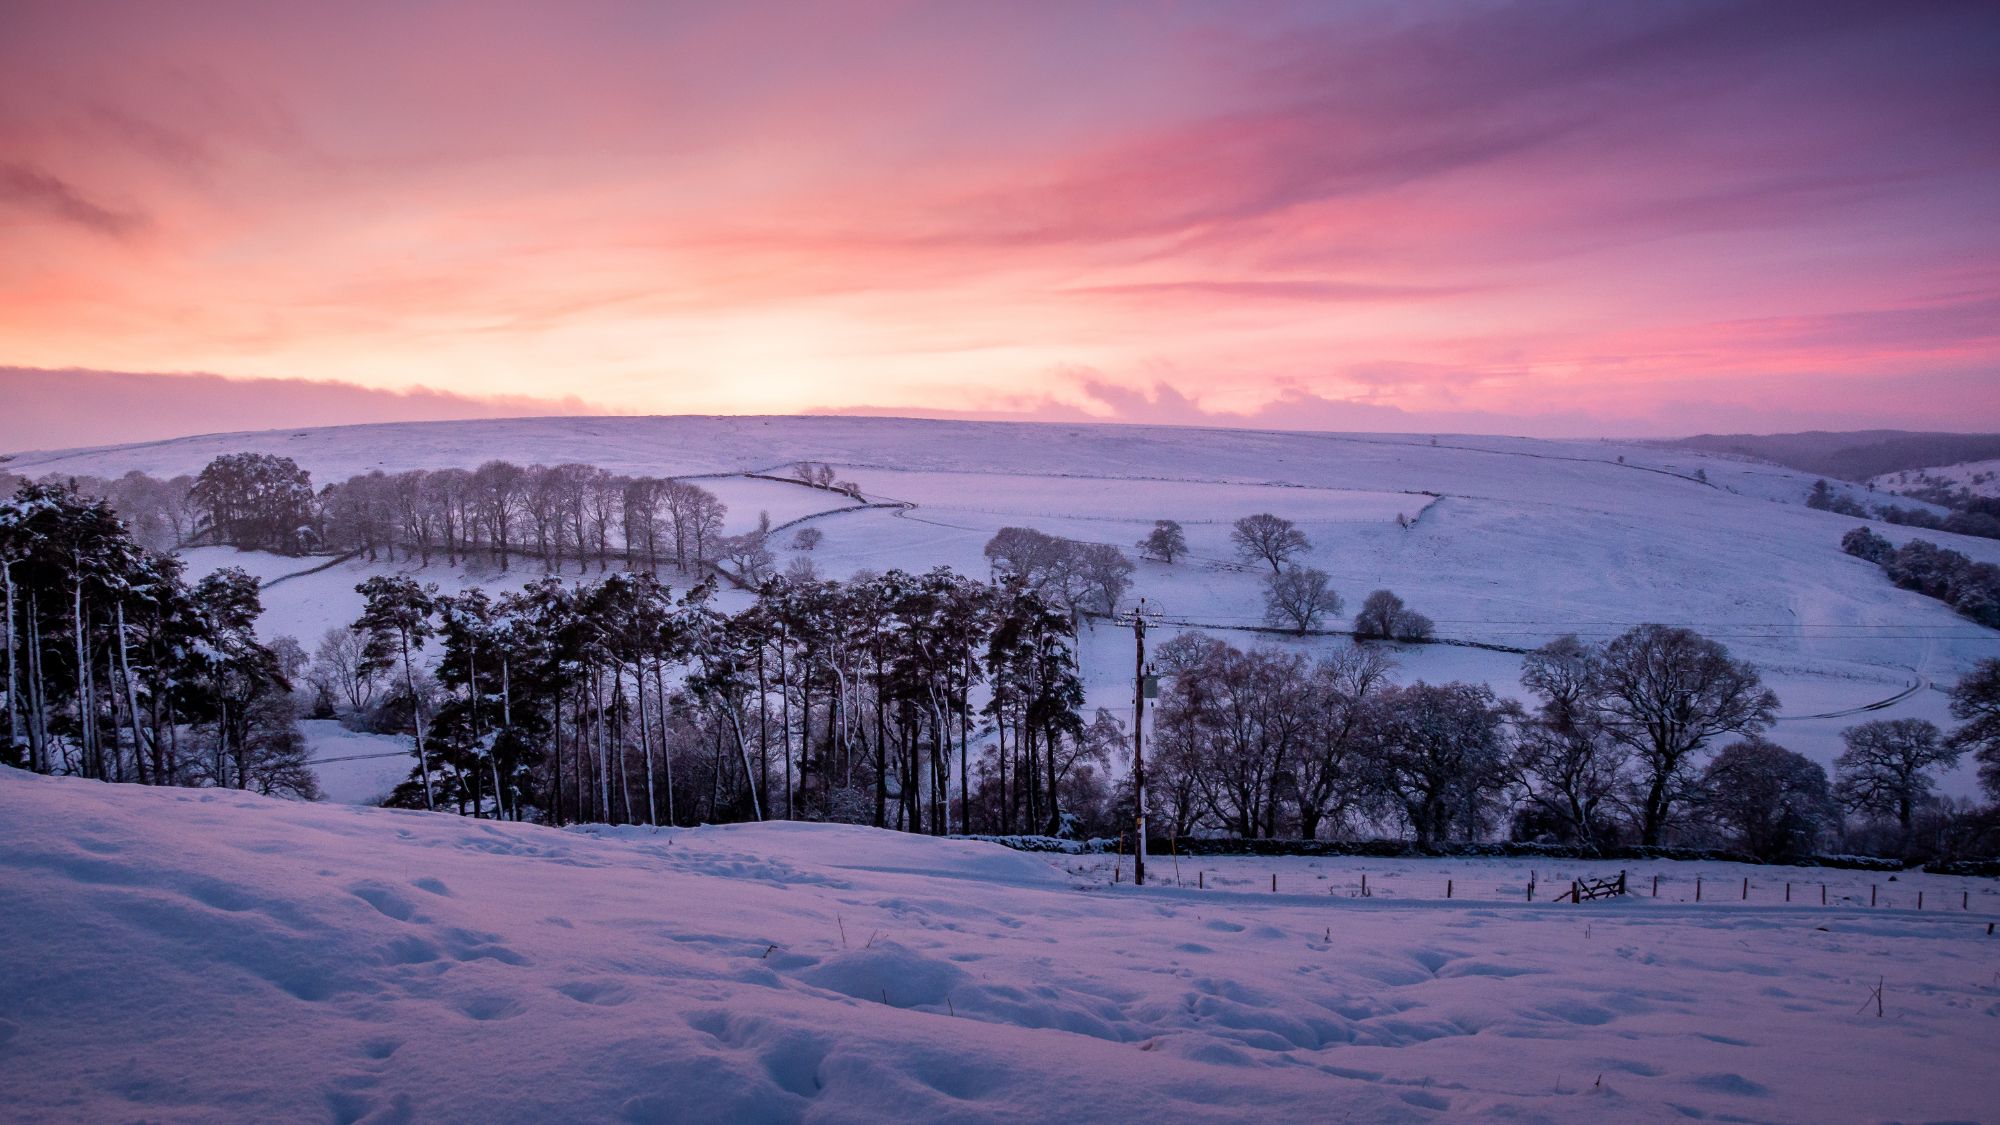 The sun sets over wheeledale and creates a stunning purple haze over the whole scene. The landscape is covered in deep snow